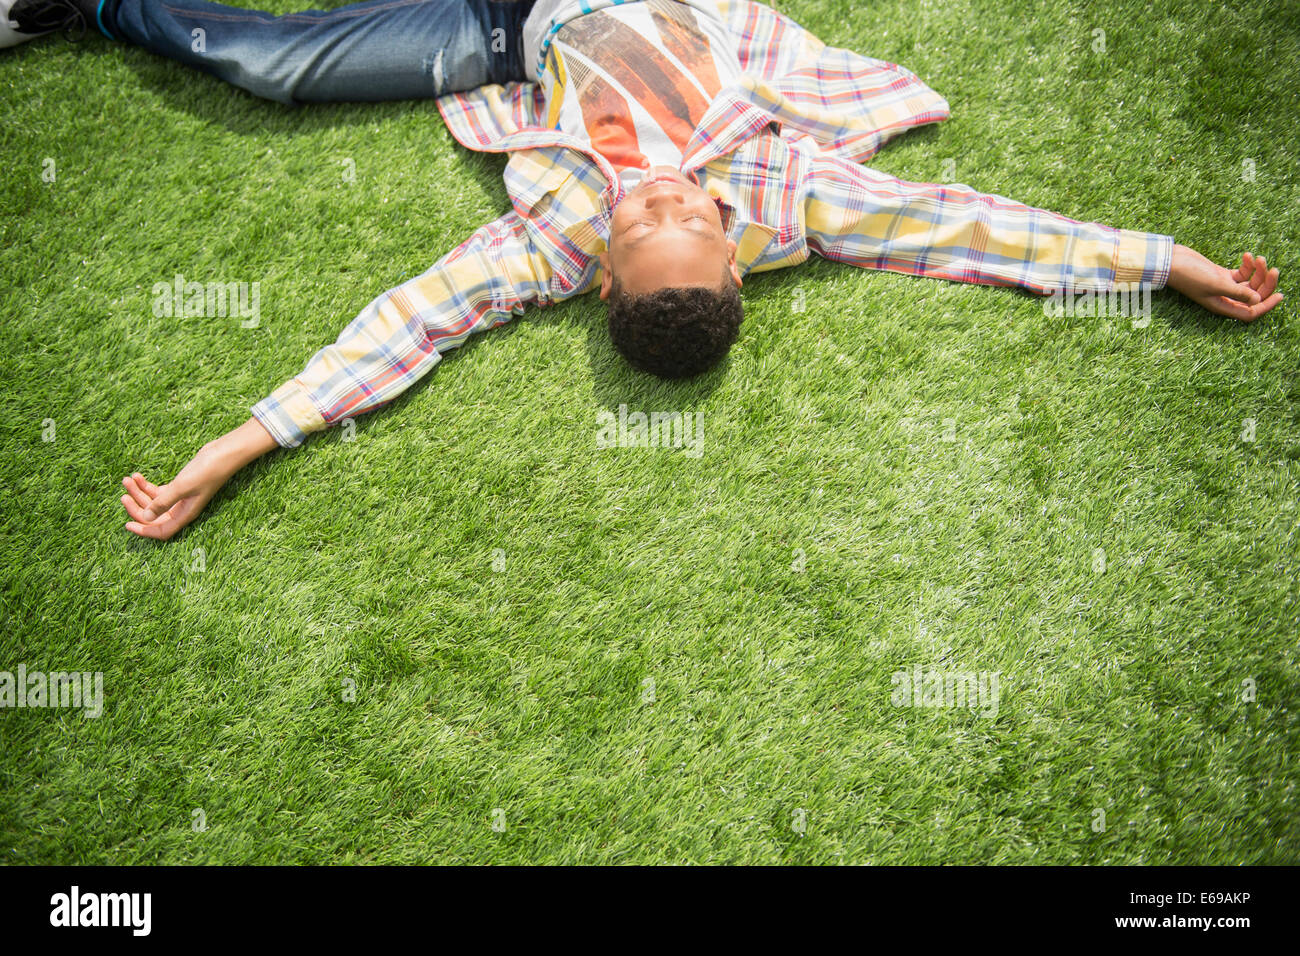 Black Boy relaxing in grass Banque D'Images